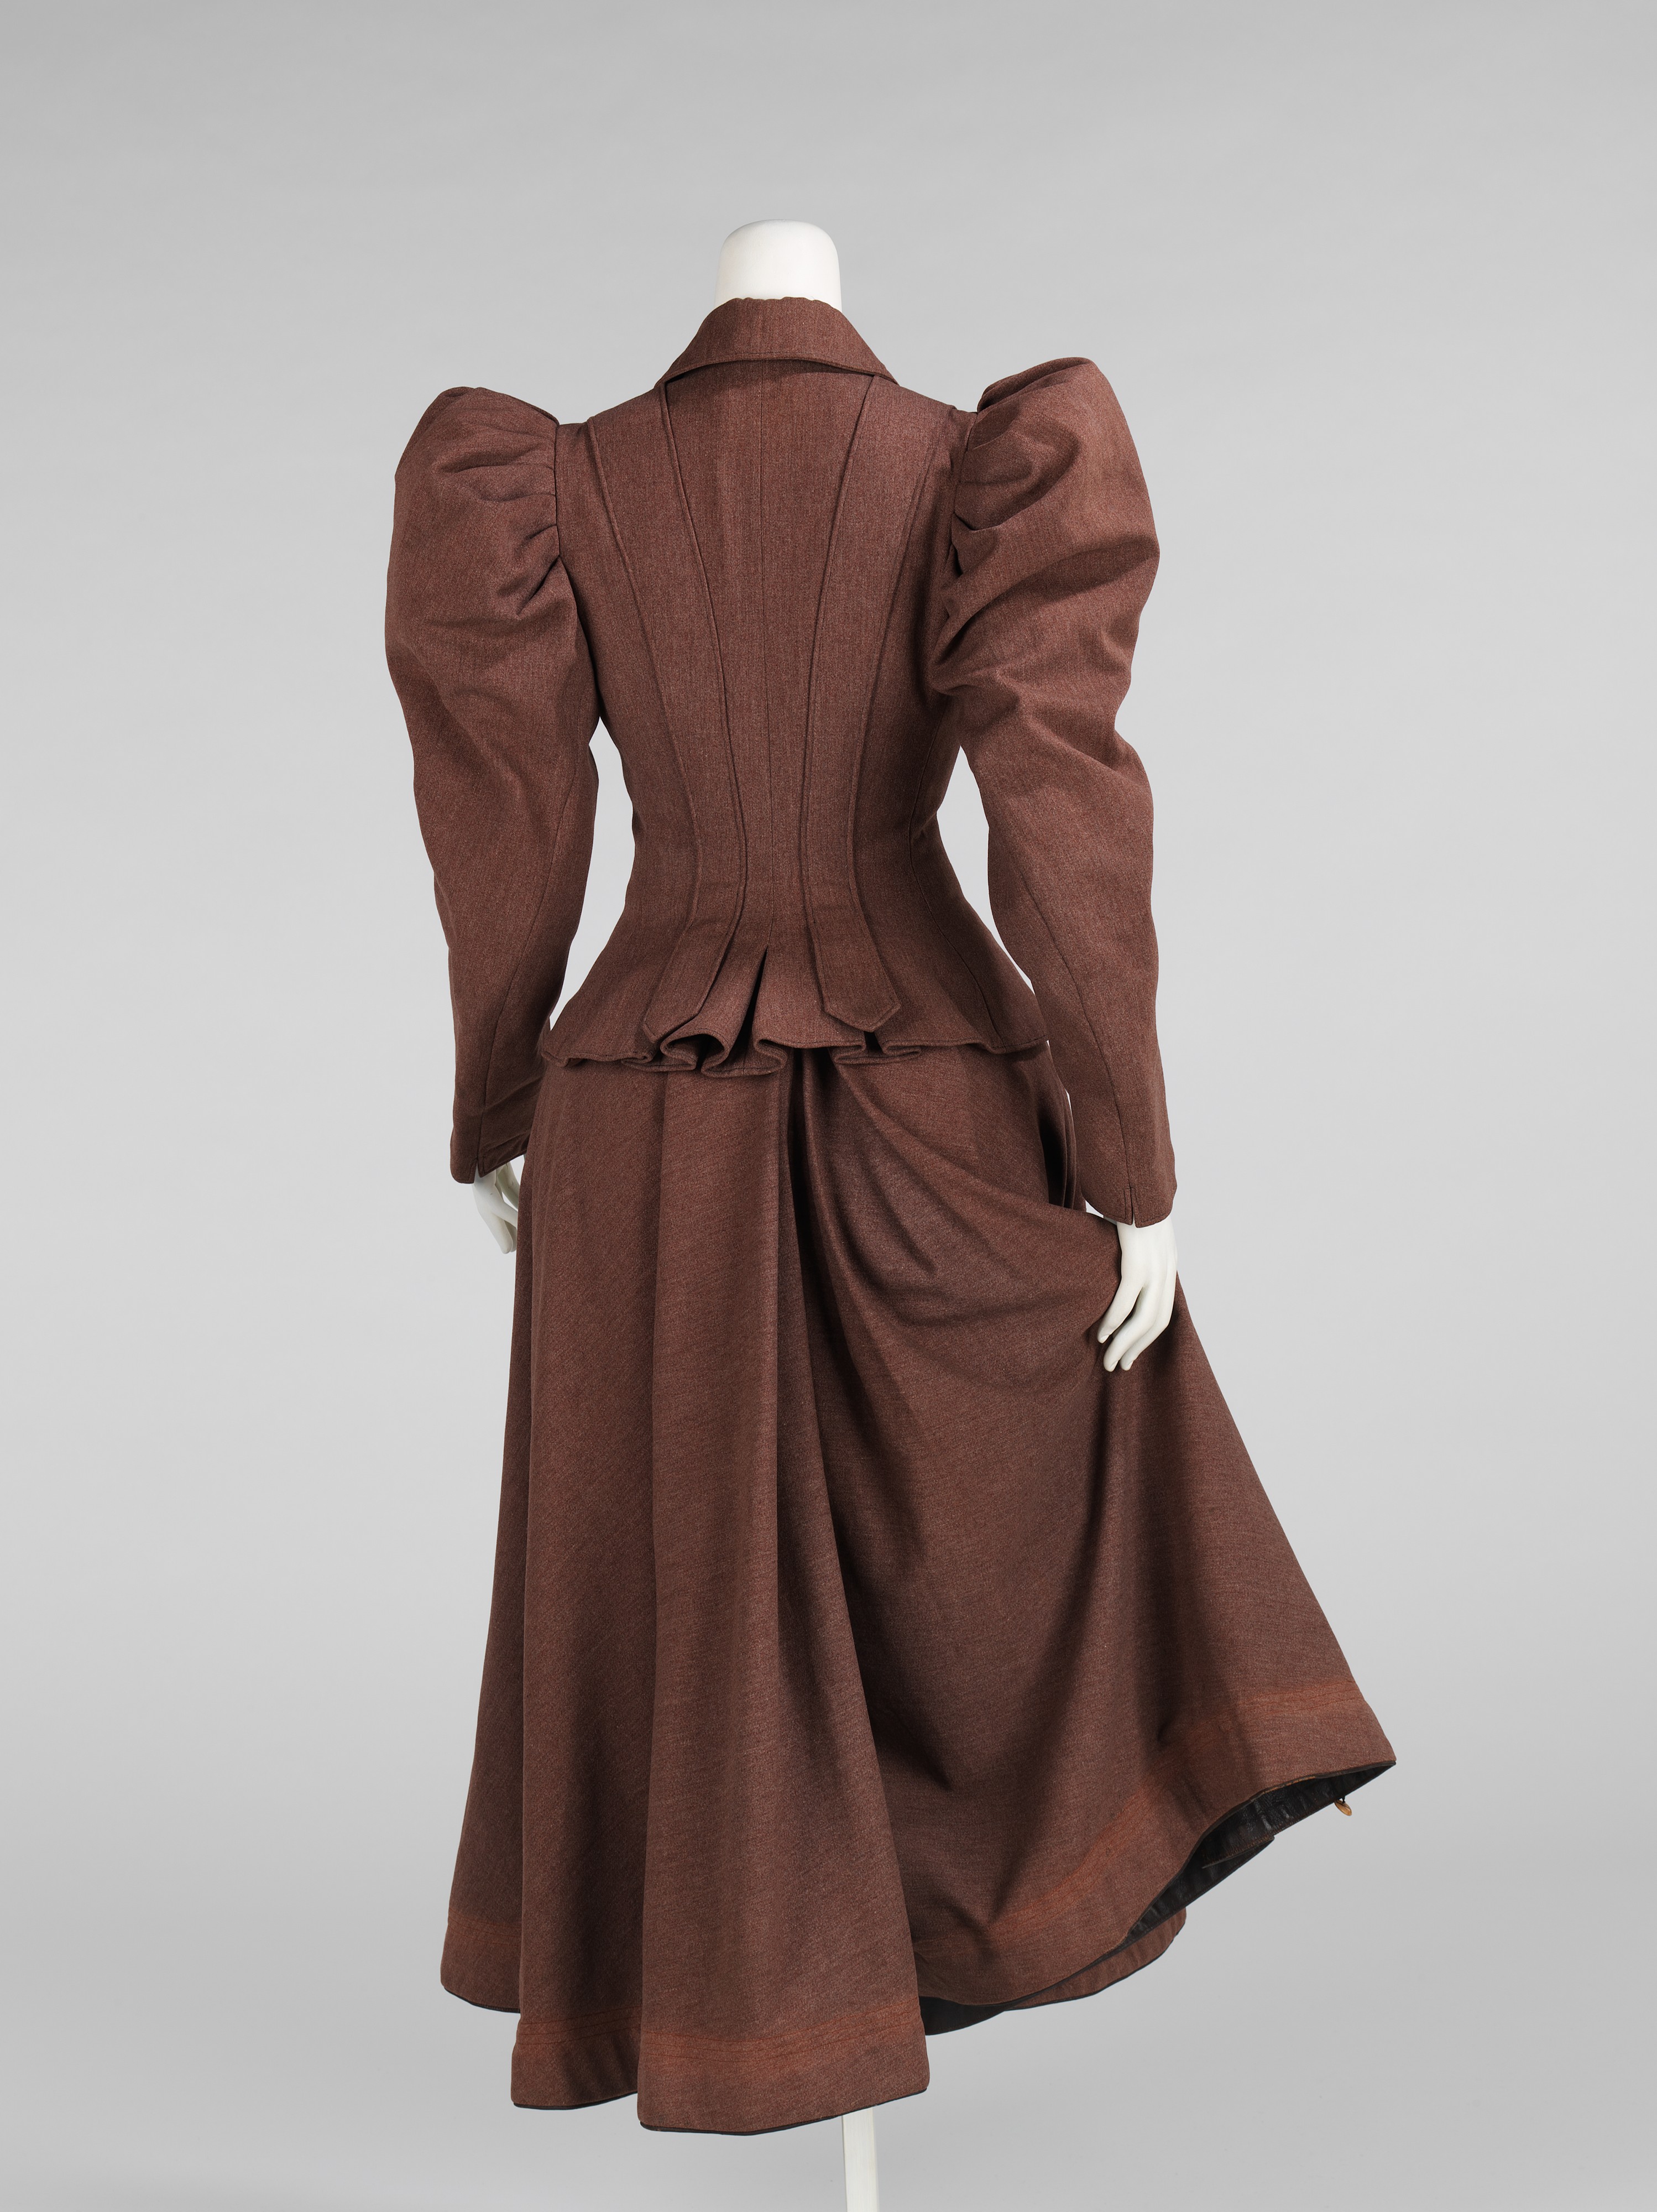 Trouville | Cycling suit | American | The Metropolitan Museum of Art